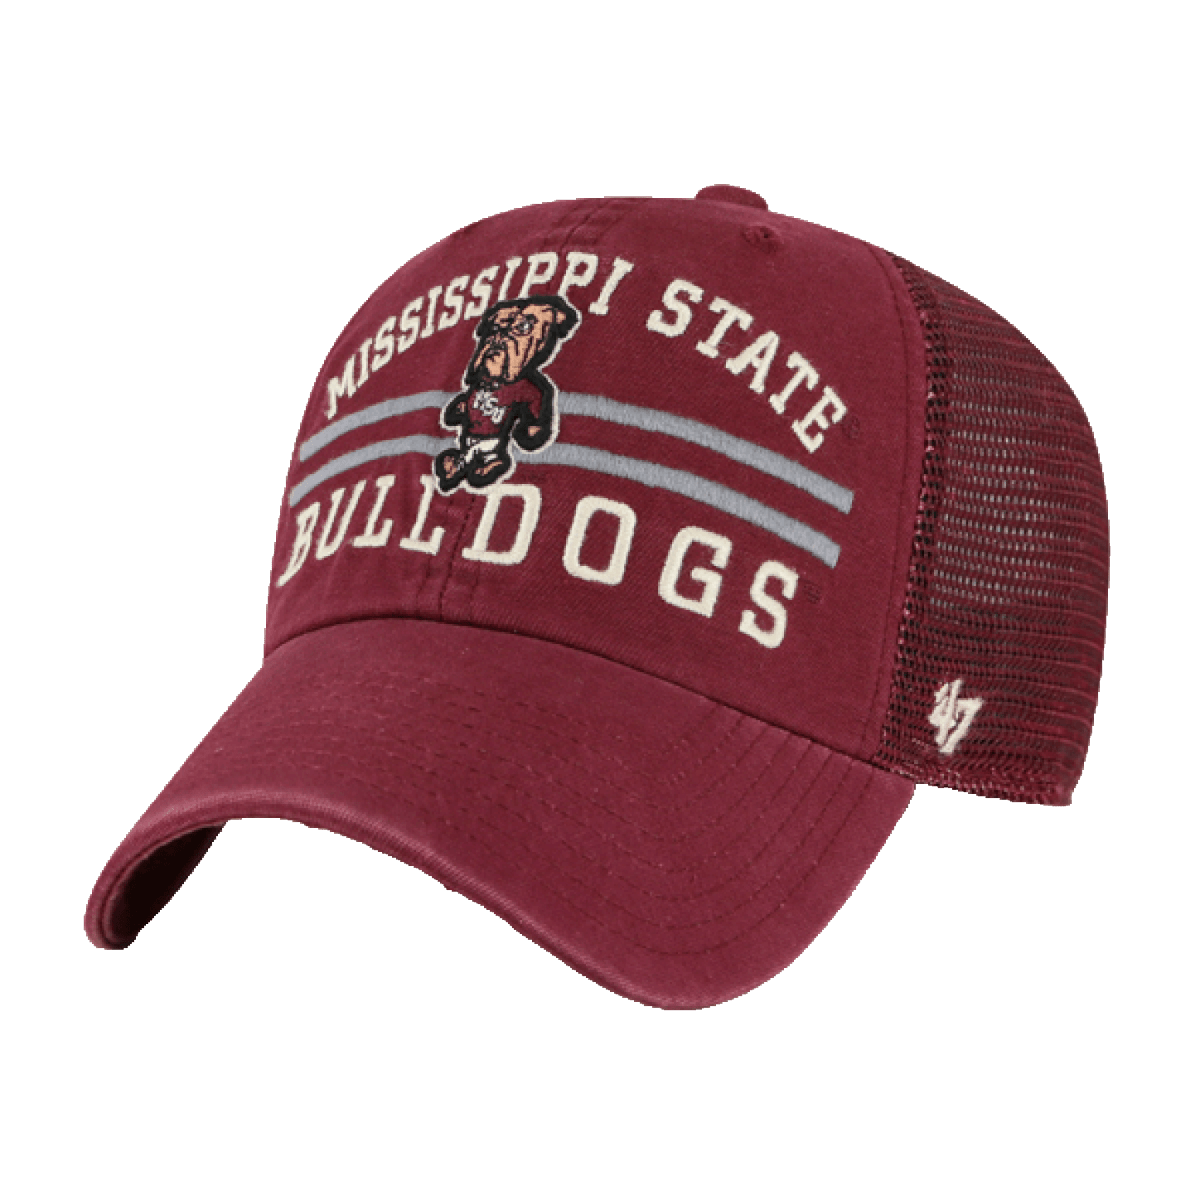 Mississippi State University 47 Brand Clean Up Mesh Hat - Shop B-Unlimited